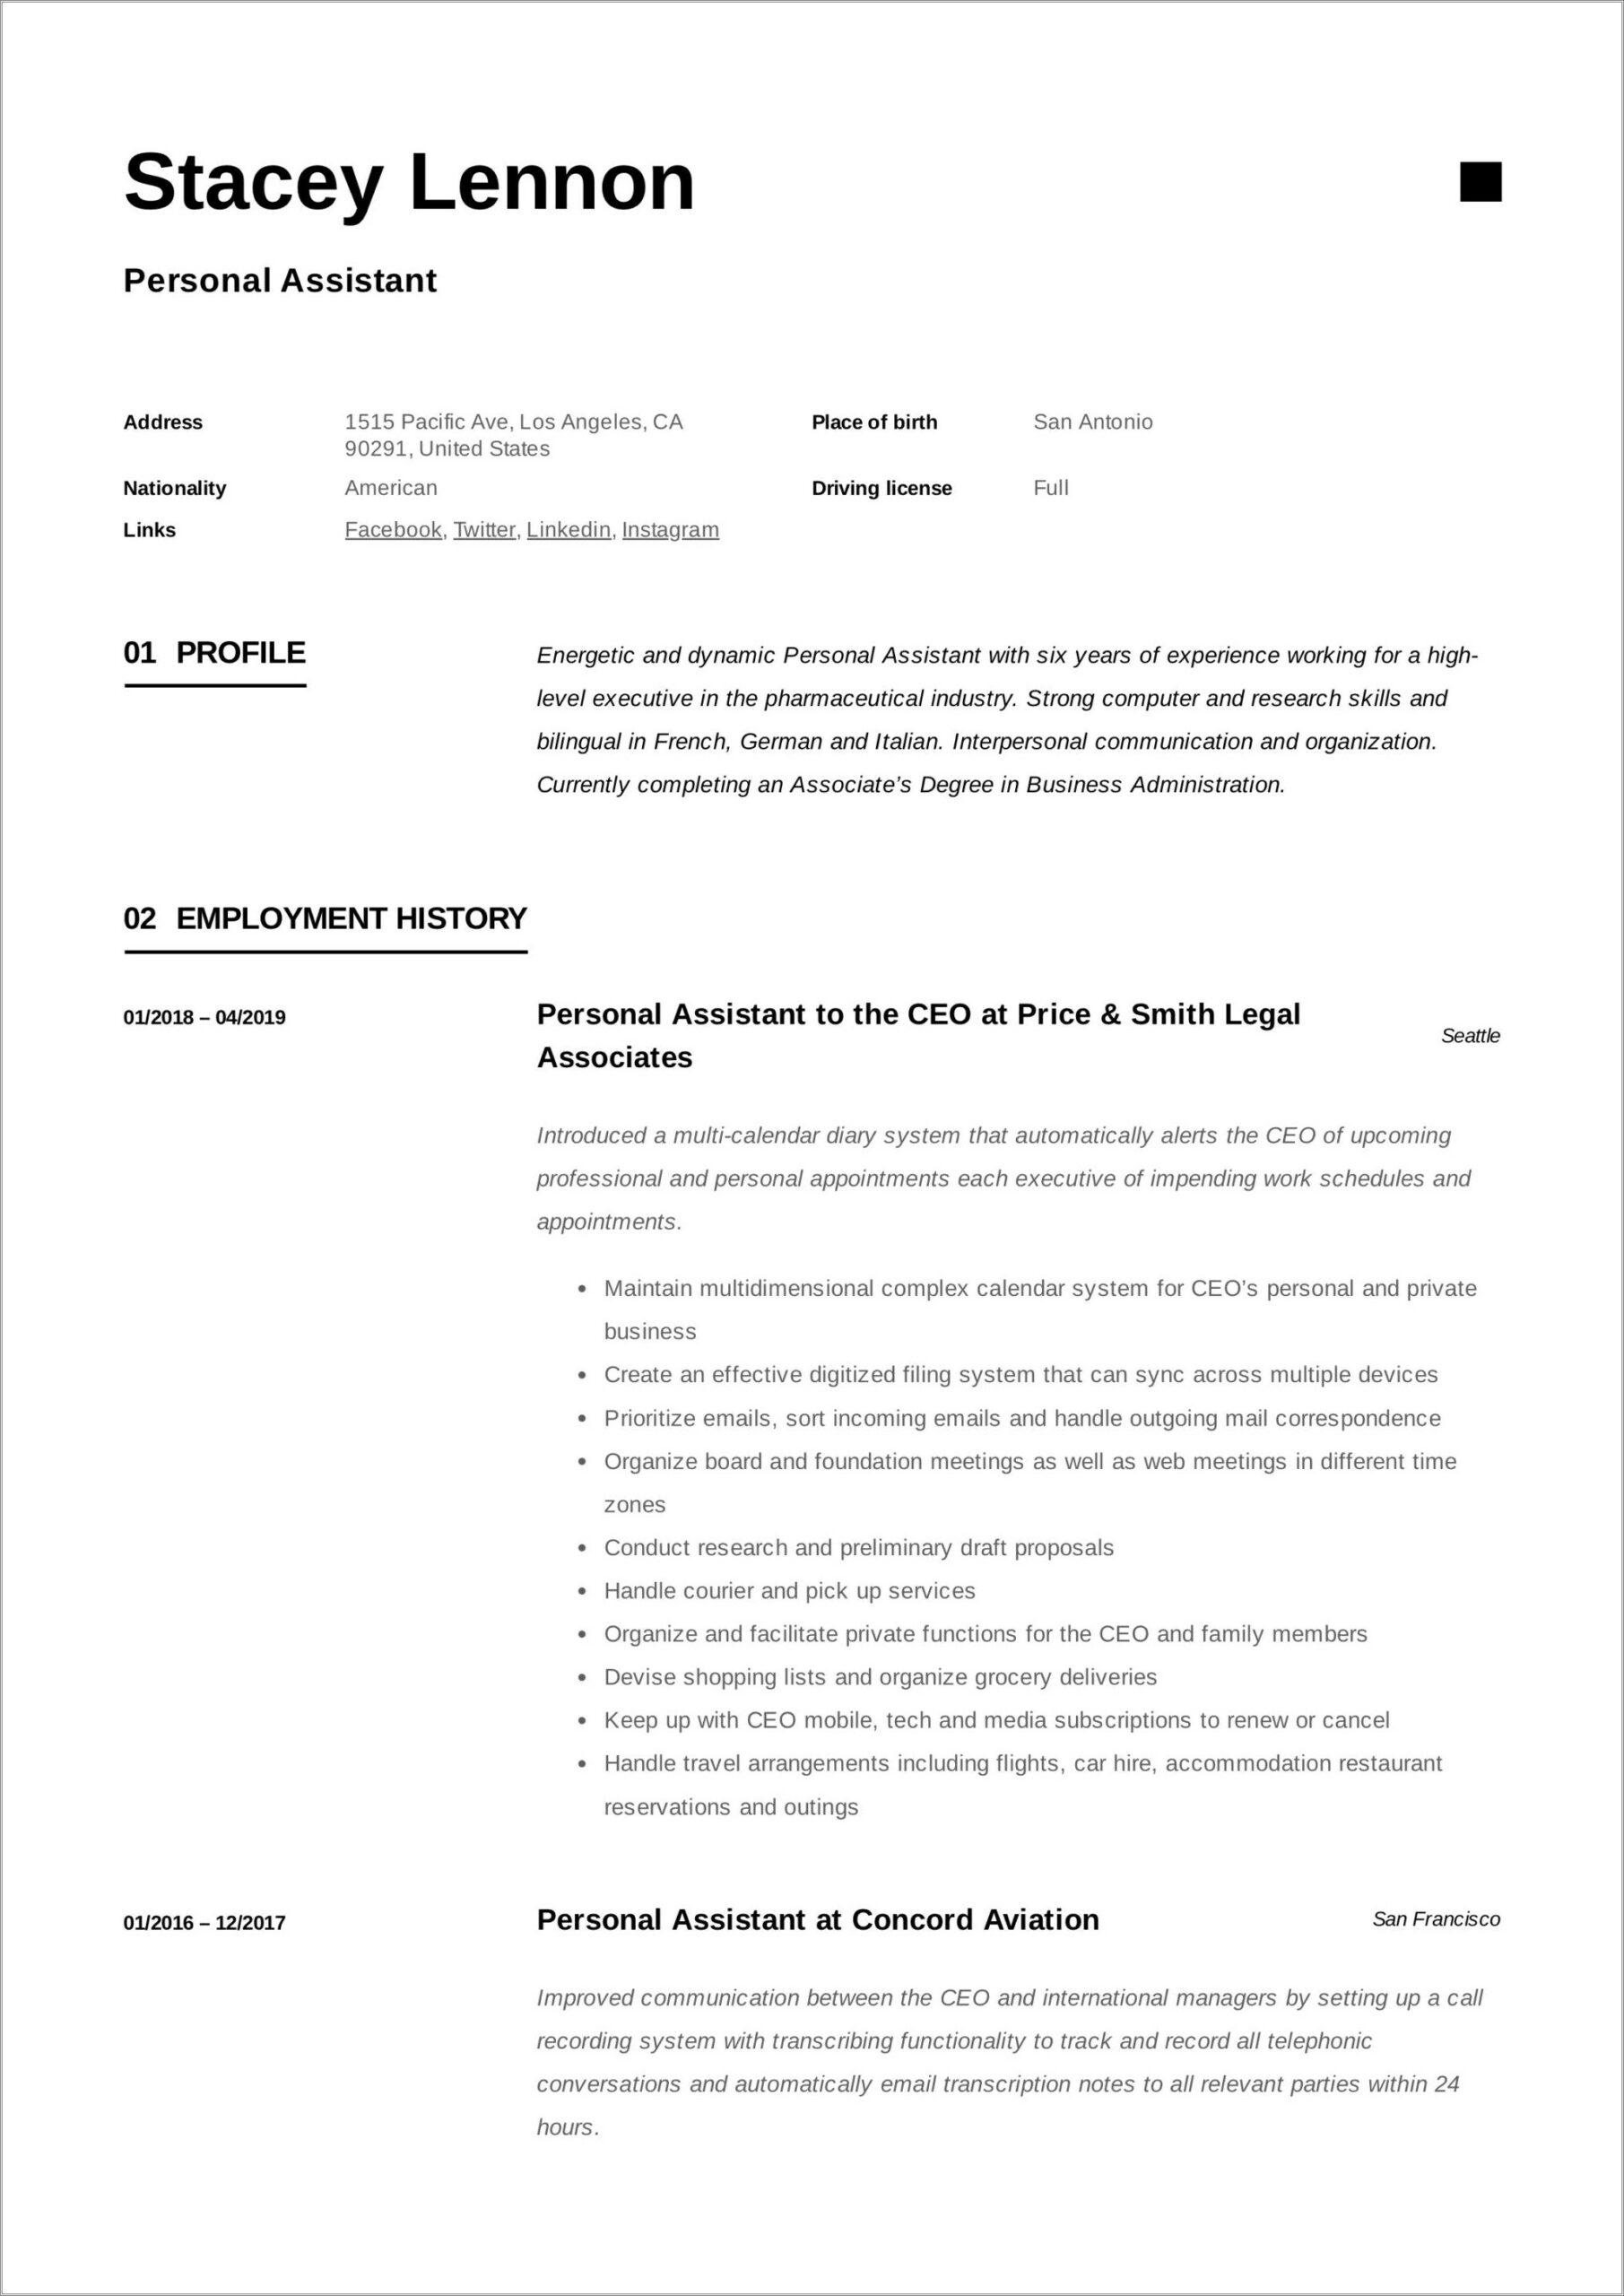 Resume Work Experience For Personal Assistant